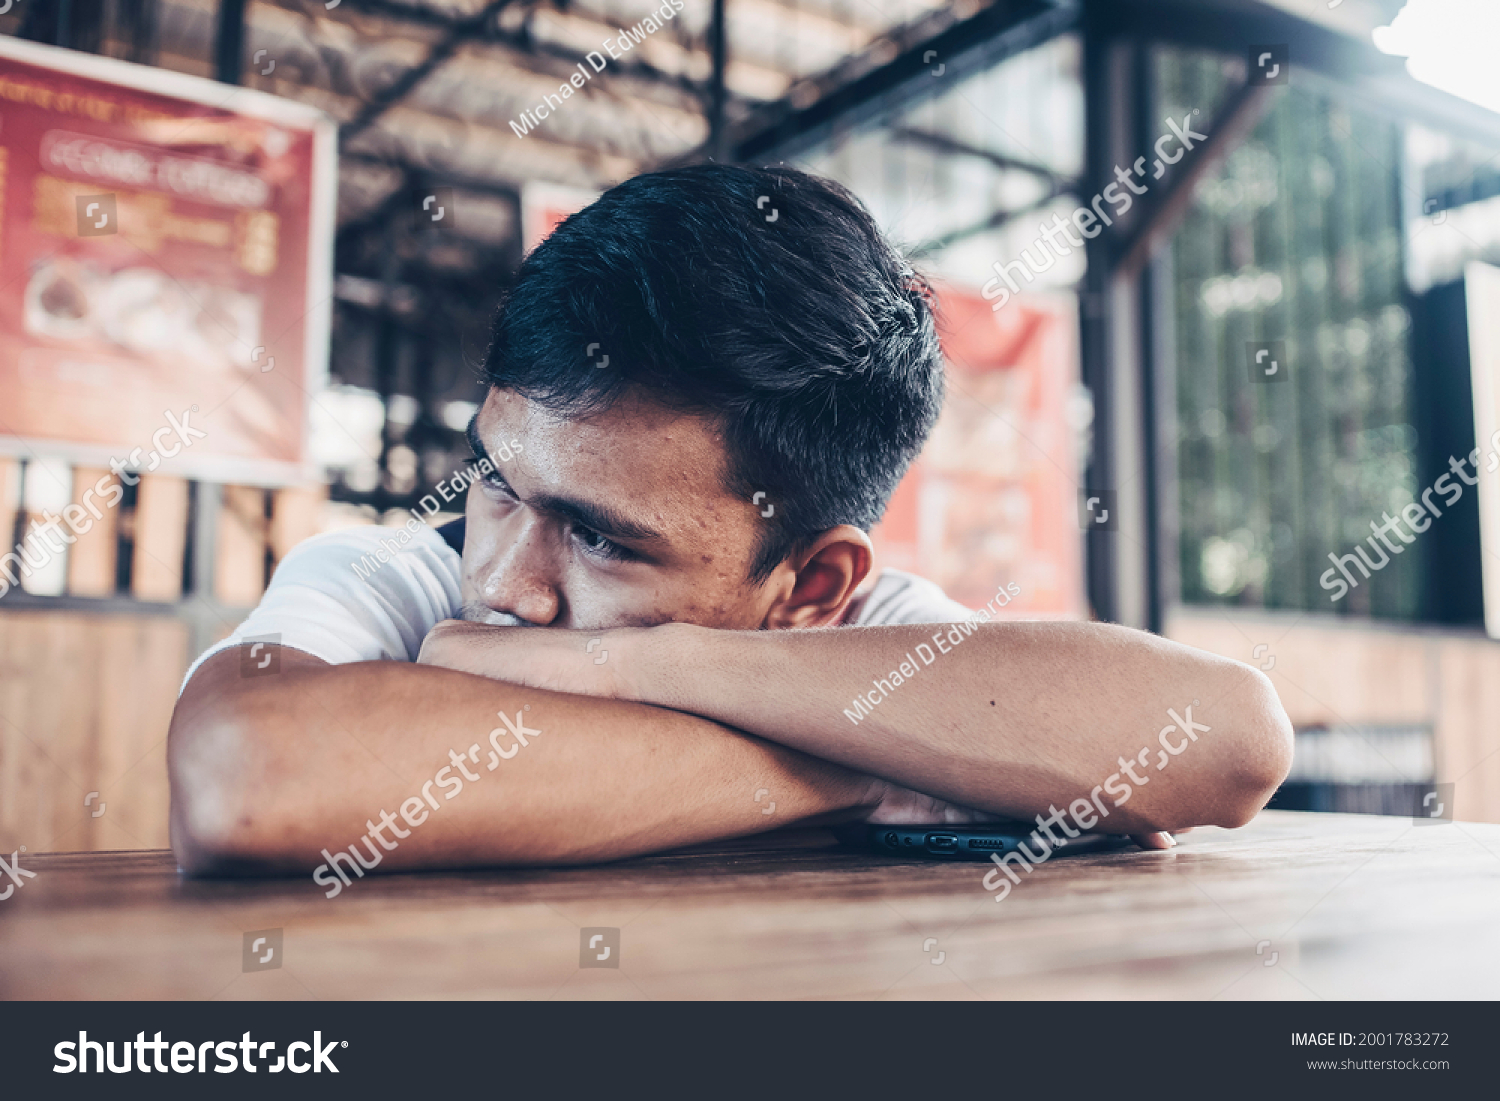 A depressed and lonely teen lying on the table at a outdoor food court. Low self esteem from facial acne. #2001783272